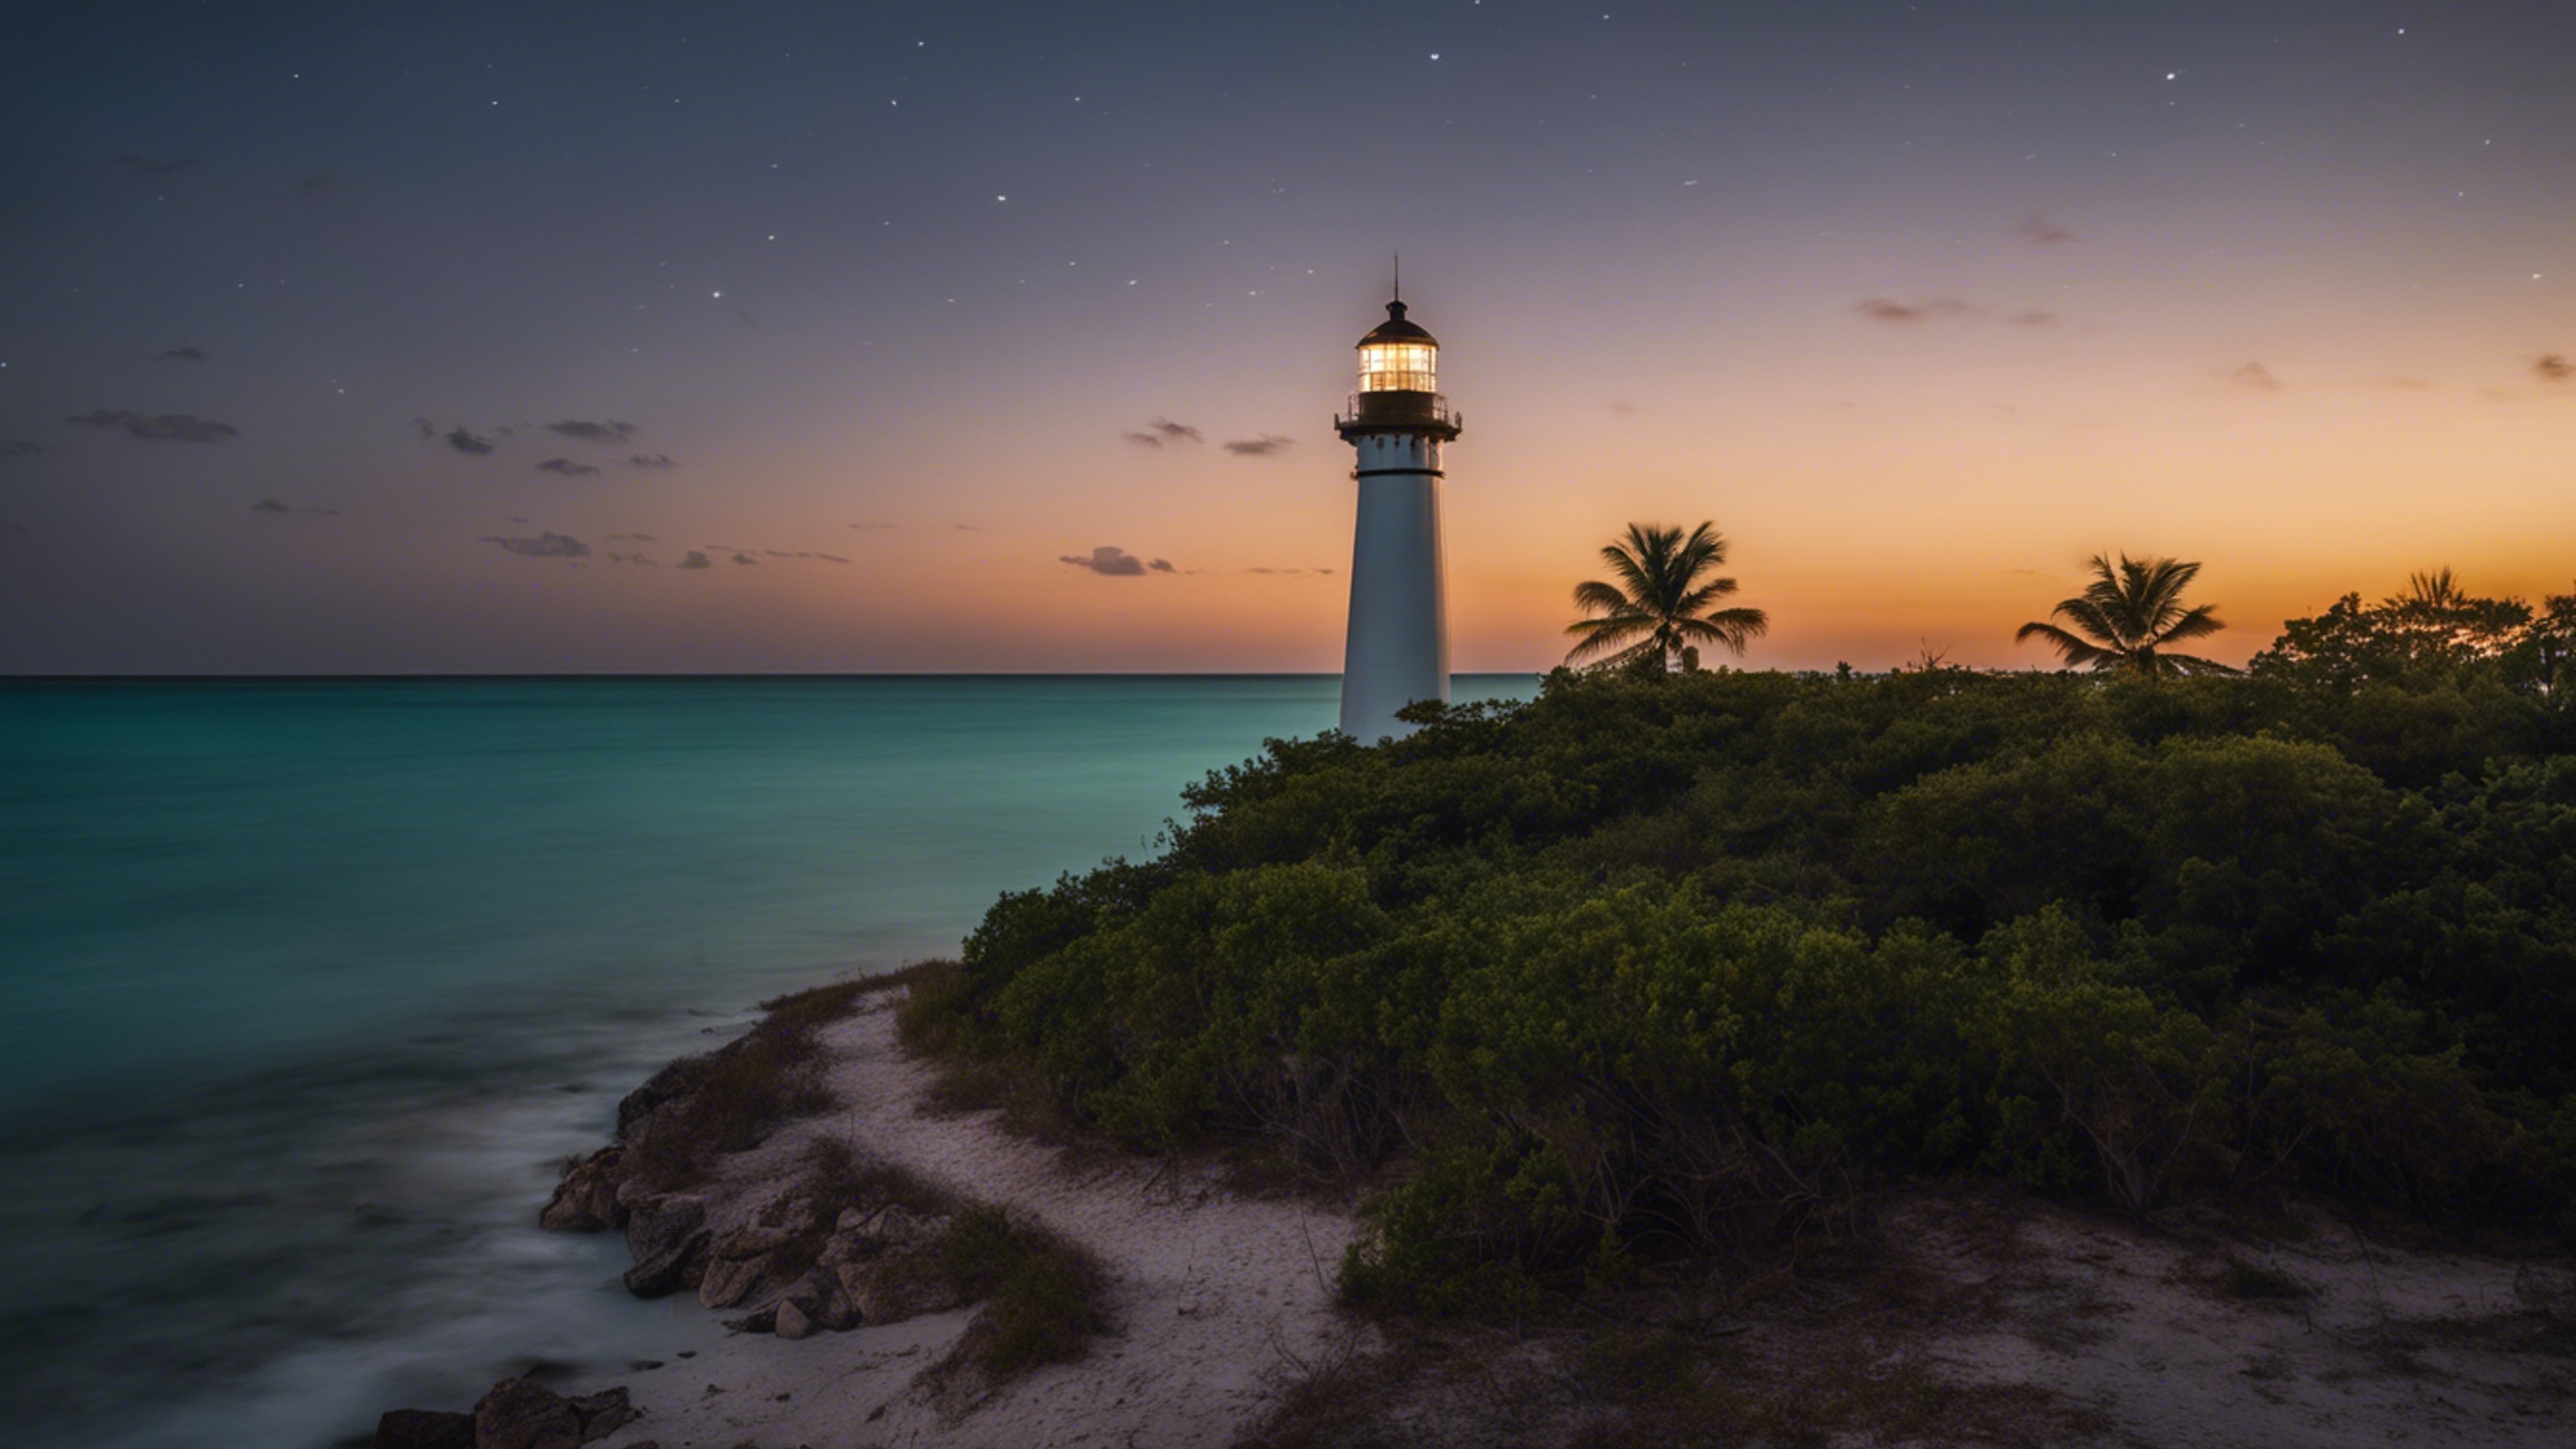 A night shot of an historic lighthouse in Key Biscayne, with the beam of light cutting through the darkness. Behang[4d5993bb763c4a90b239]